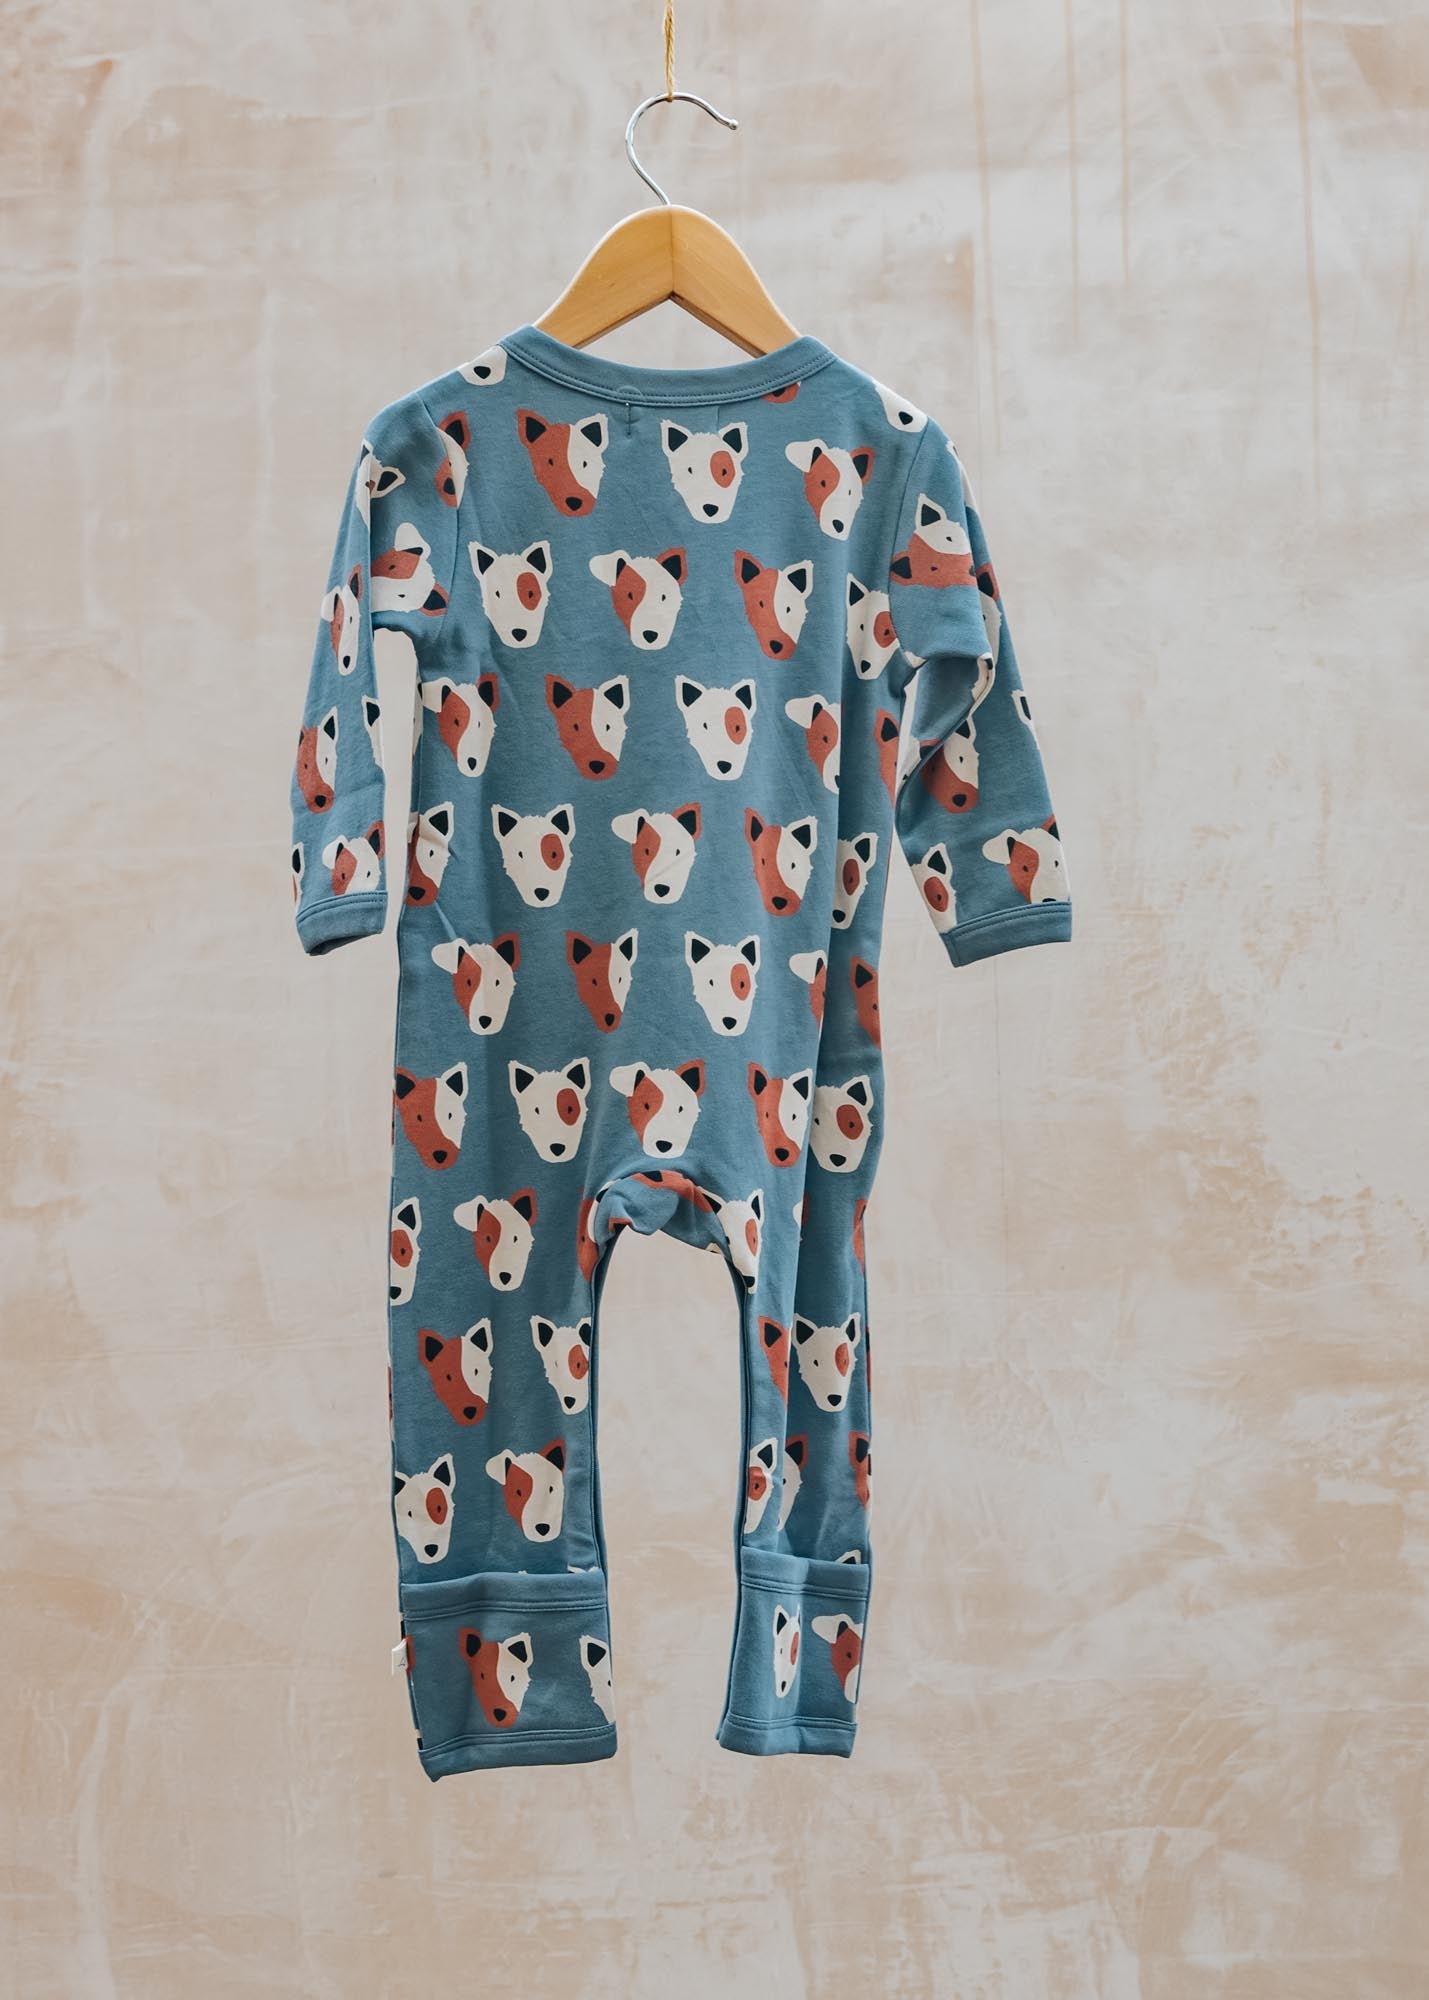 Pigeon Organics Babies' Kimono Romper in Blue with Dogs